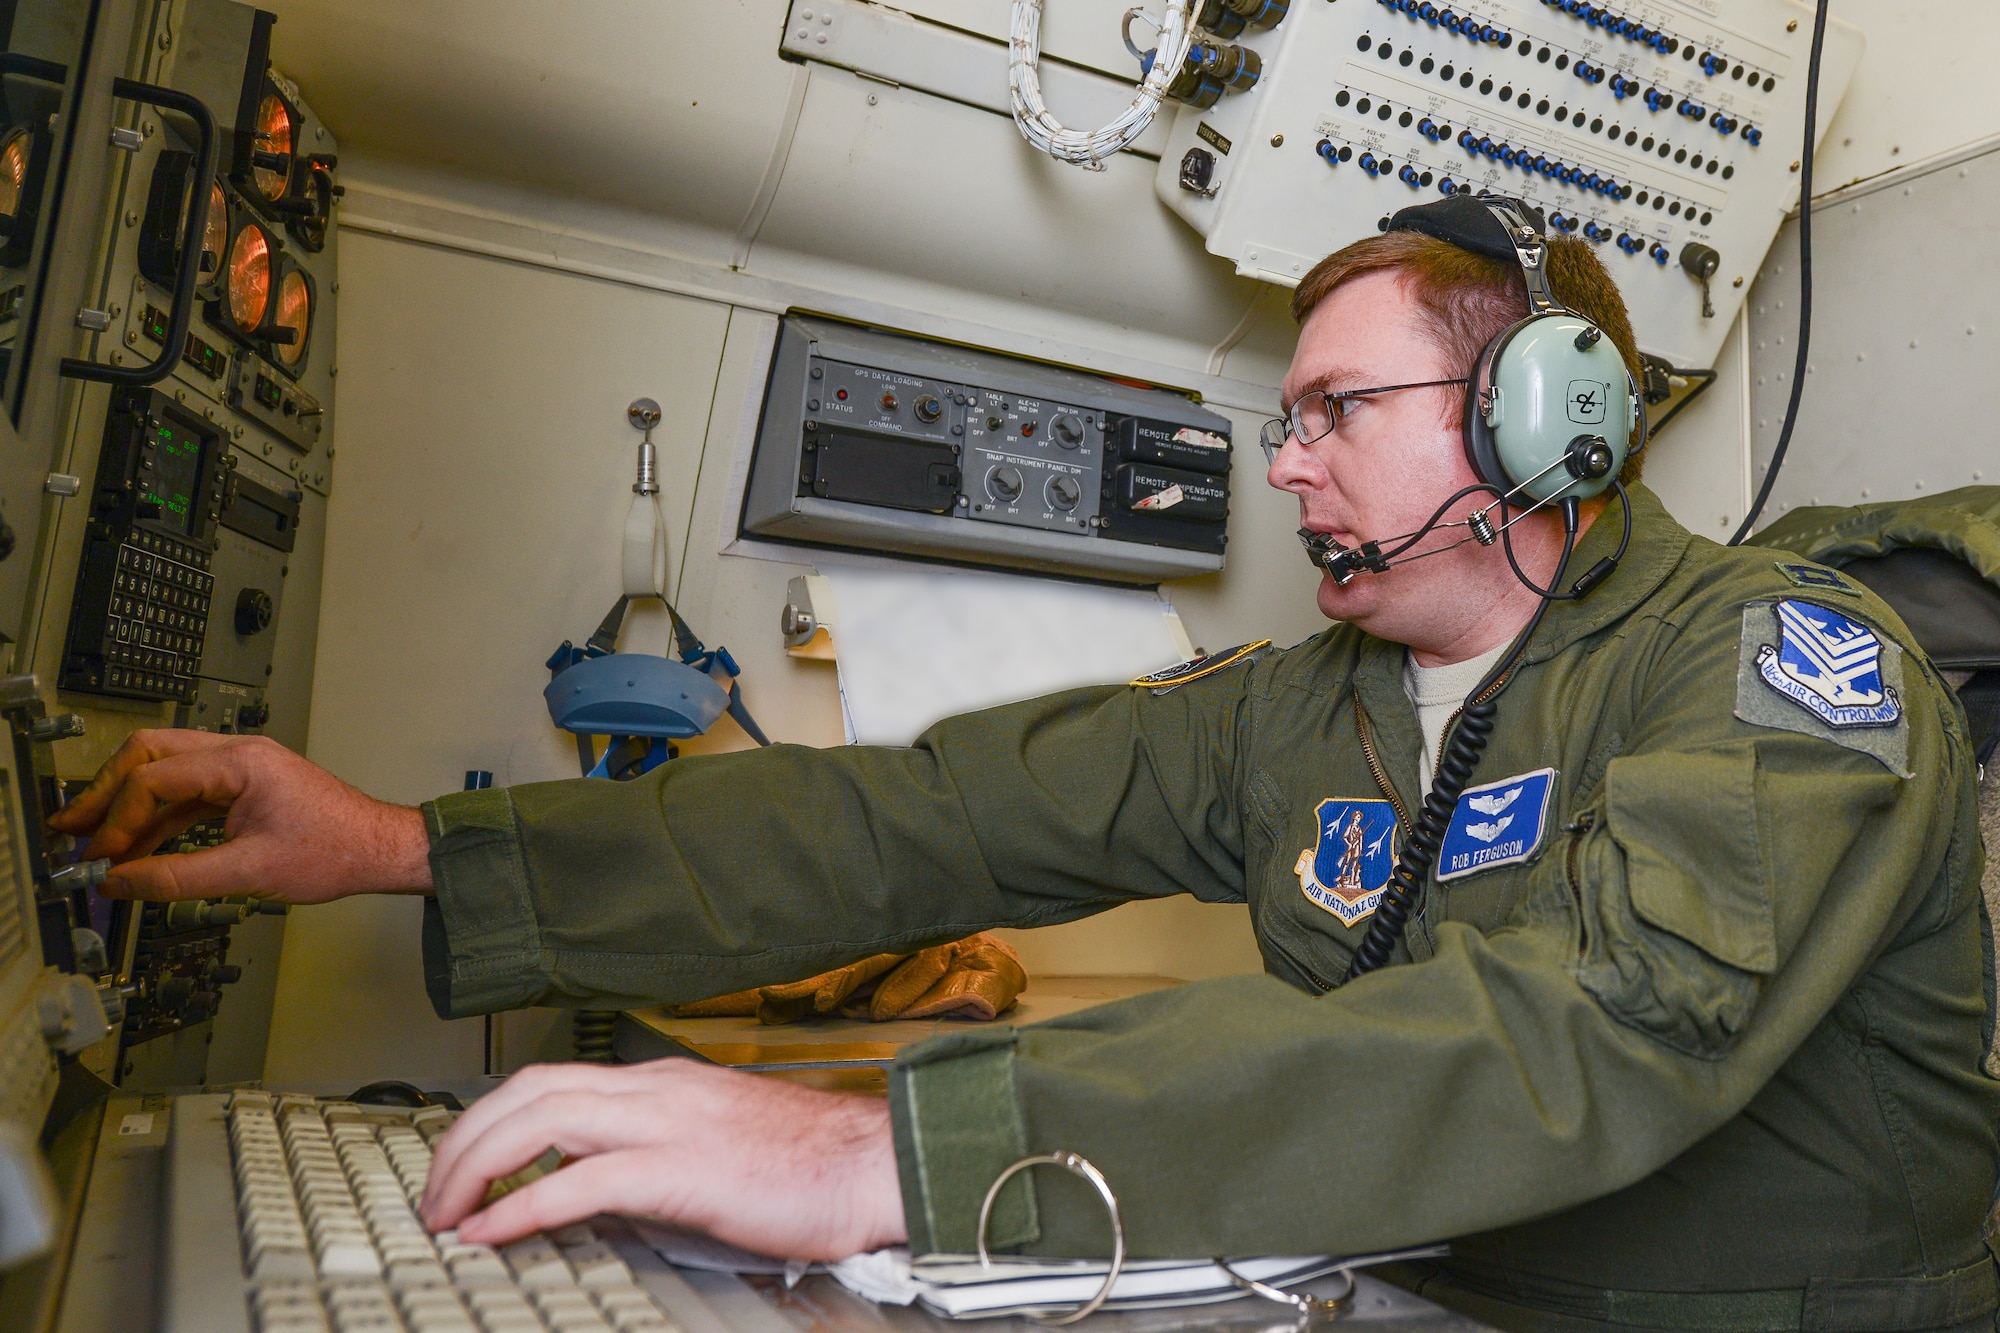 U.S. Air Force Capt. Rob Ferguson, a combat systems officer with the 116th Air Control Wing, Georgia Air National Guard, monitors and adjusts his screen at his operator work station aboard the E-8C Joint STARS aircraft during exercise Operation Carolina Thunder, Robins Air Force Base, Ga., Nov. 15, 2014.  During the exercise, Airmen and Soldiers from the 116th Air Control Wing and the 138th Military Intelligence Company provided targeting data and intelligence to F-16 Fighting Falcons, AH-64D Apache Attack Helicopters and ground forces using the one-of-a-kind battle management command and control, intelligence, surveillance and reconnaissance capabilities of the E-8C Joint STARS. The exercise was a multi-state, multi-component, collective training exercise conducted during the South Carolina drill weekend. It involved more than 650 participants from South Carolina, North Carolina, Georgia and Tennessee National Guard units. (Portion of photo blurred for security purposes) (U.S. Air National Guard photo by Tech. Sgt. Regina Young/released)